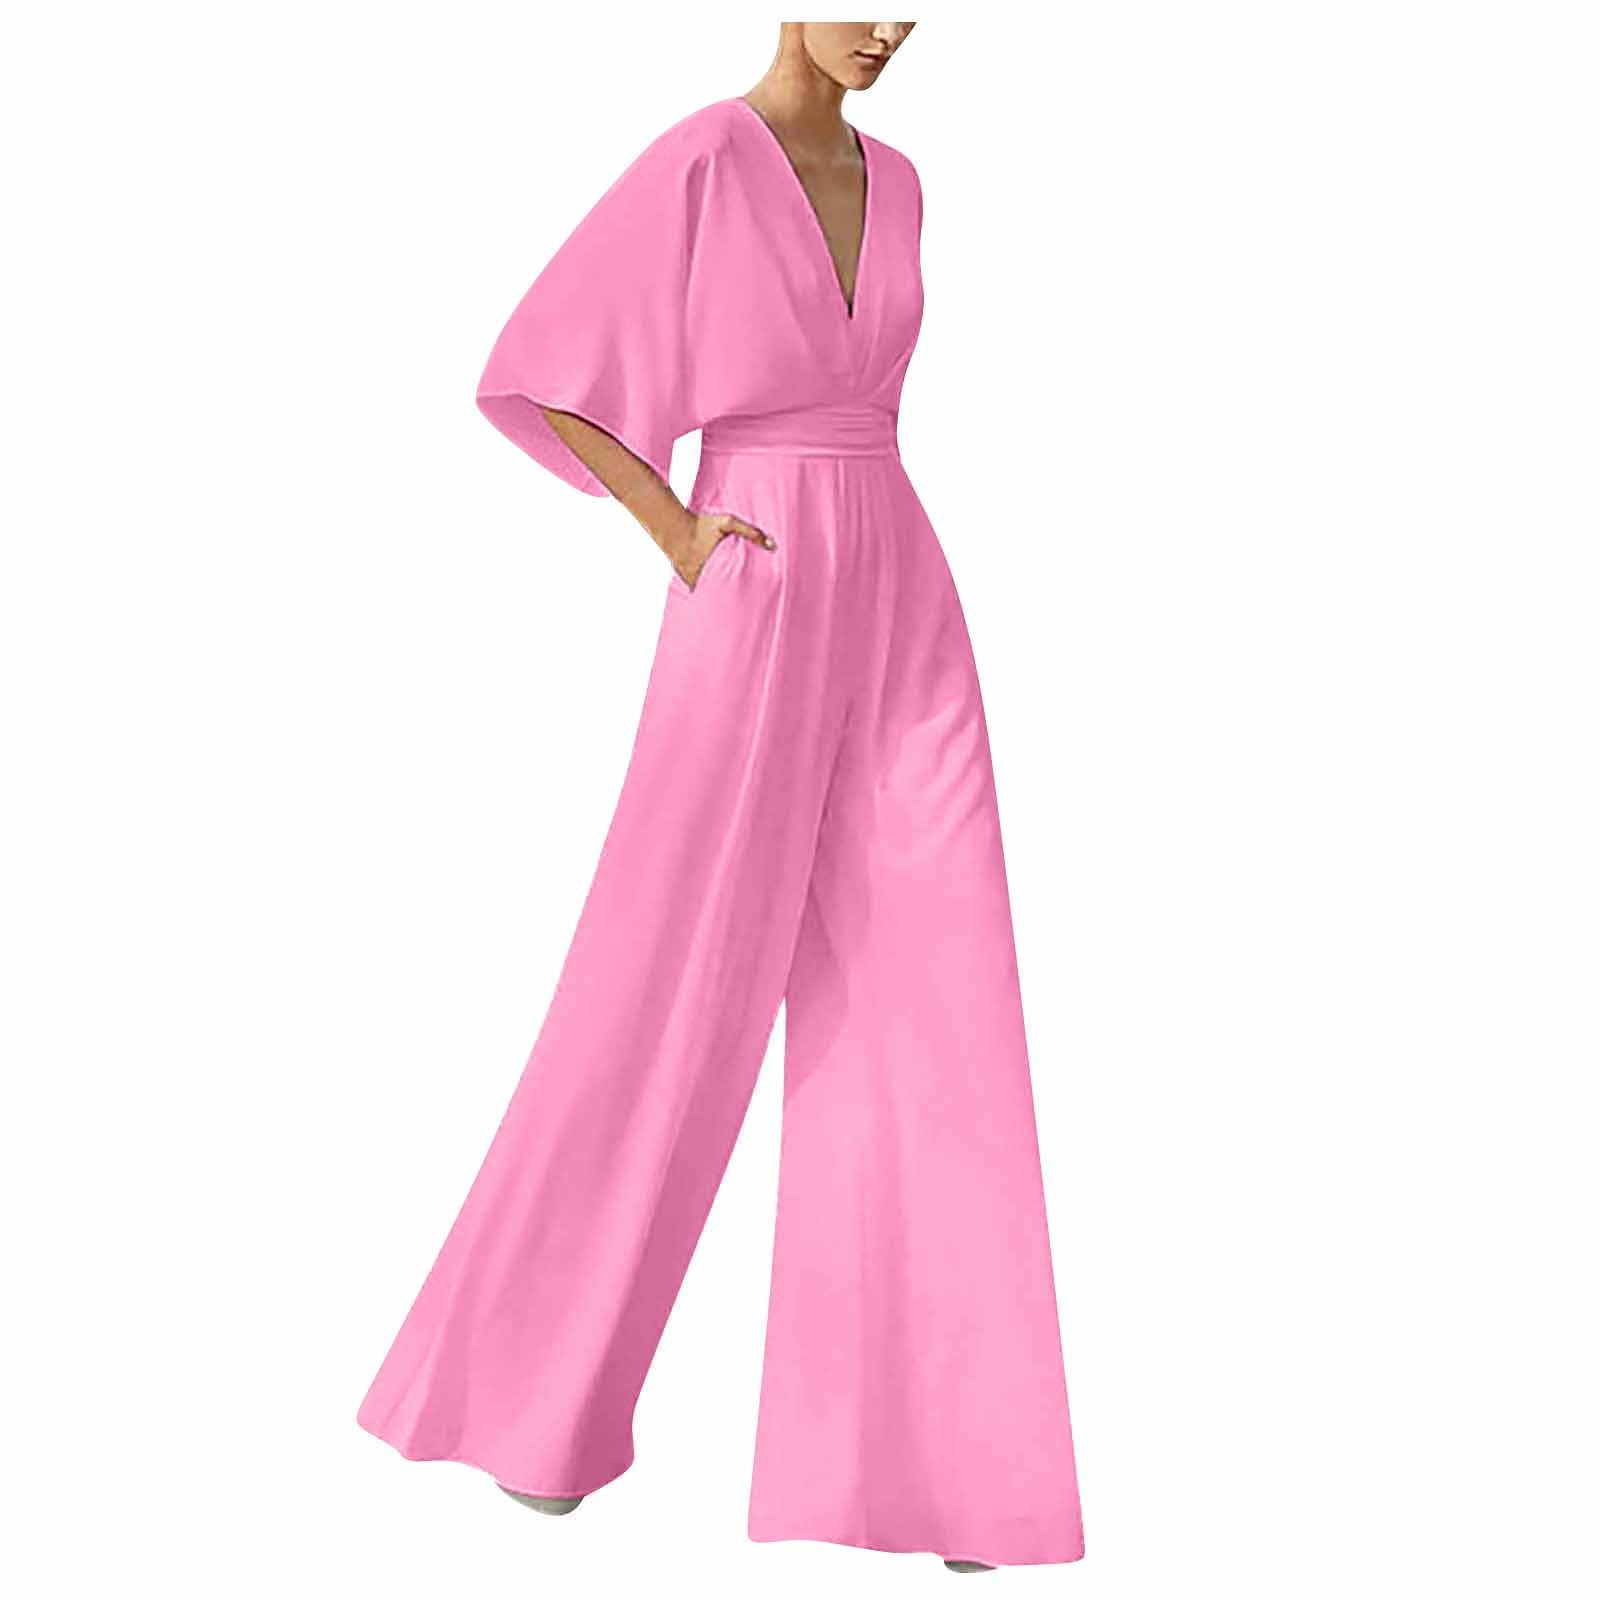 Alrise Pink Romper Trousers Casual Women's Banquet Dress Jumpsuit Sexy ...